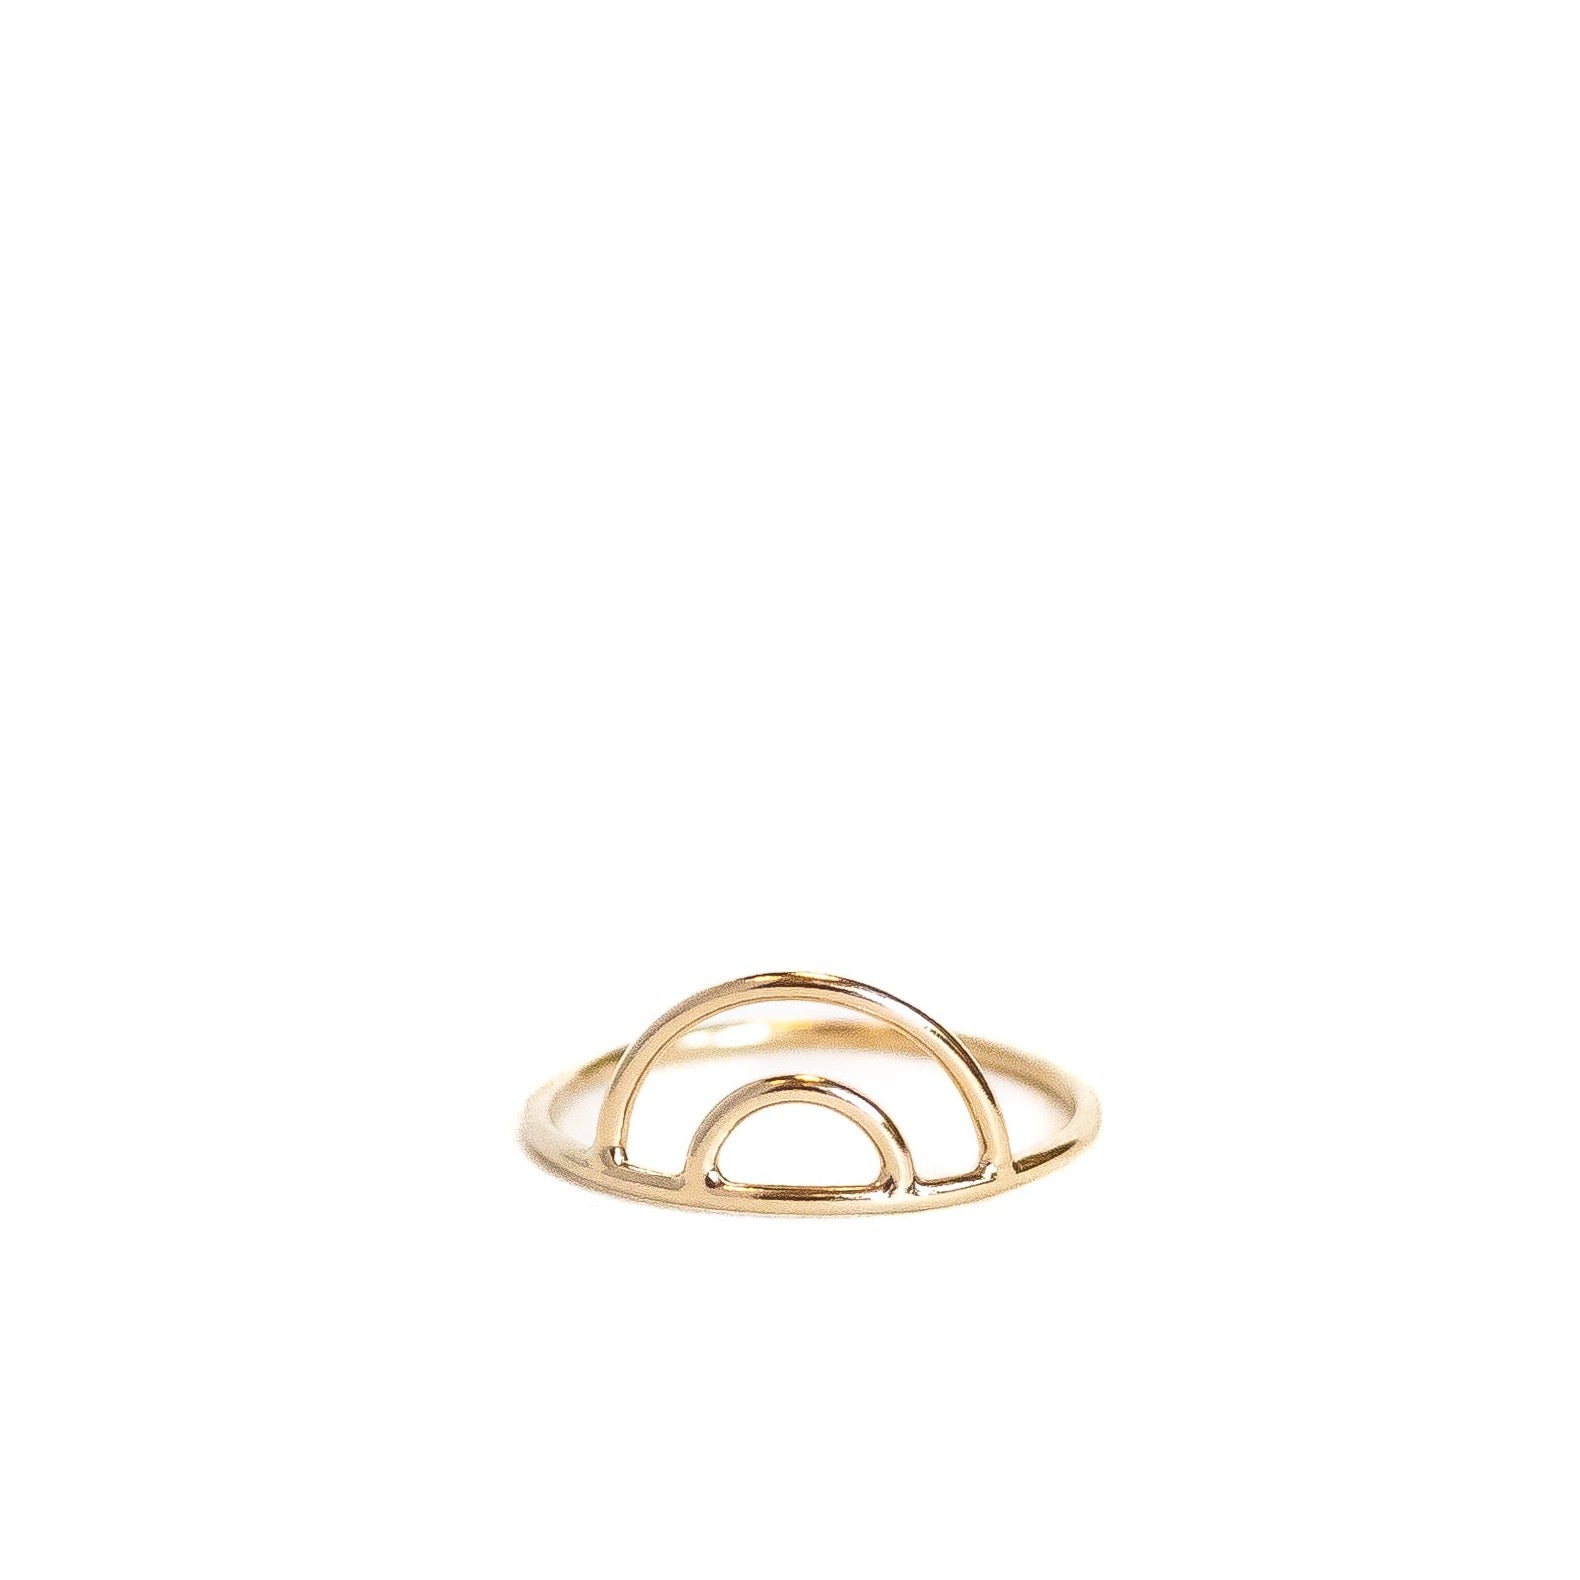 Yellow gold filled double arch rainbow ring. 